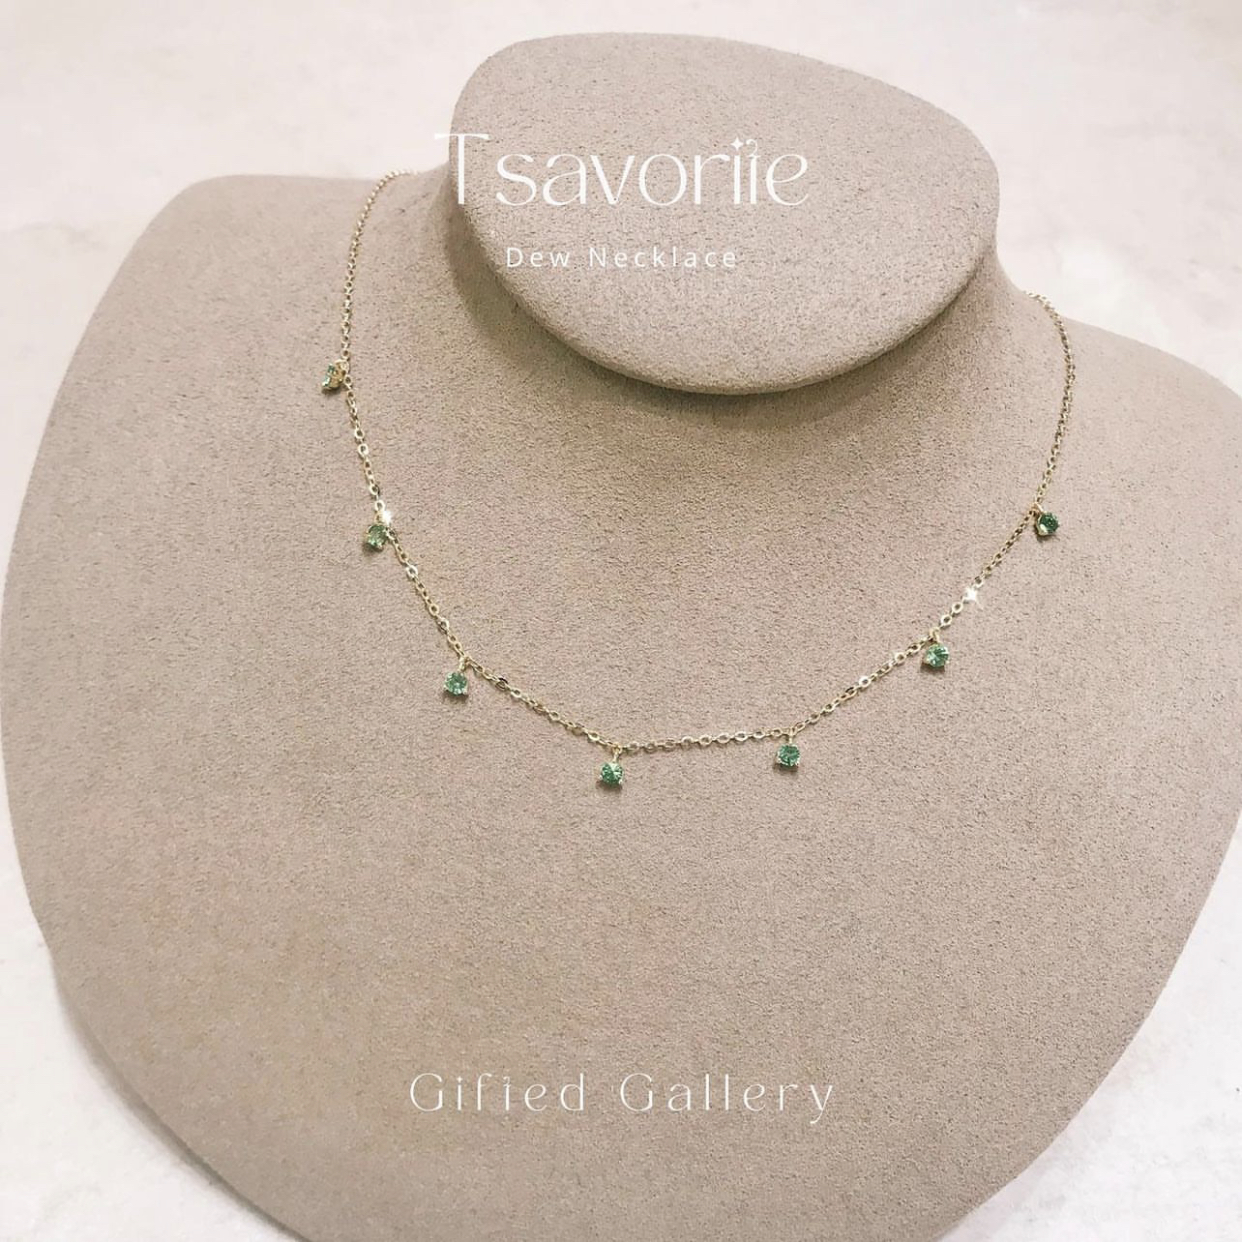 Tsavorite Dew Necklace By Gifted Gallery